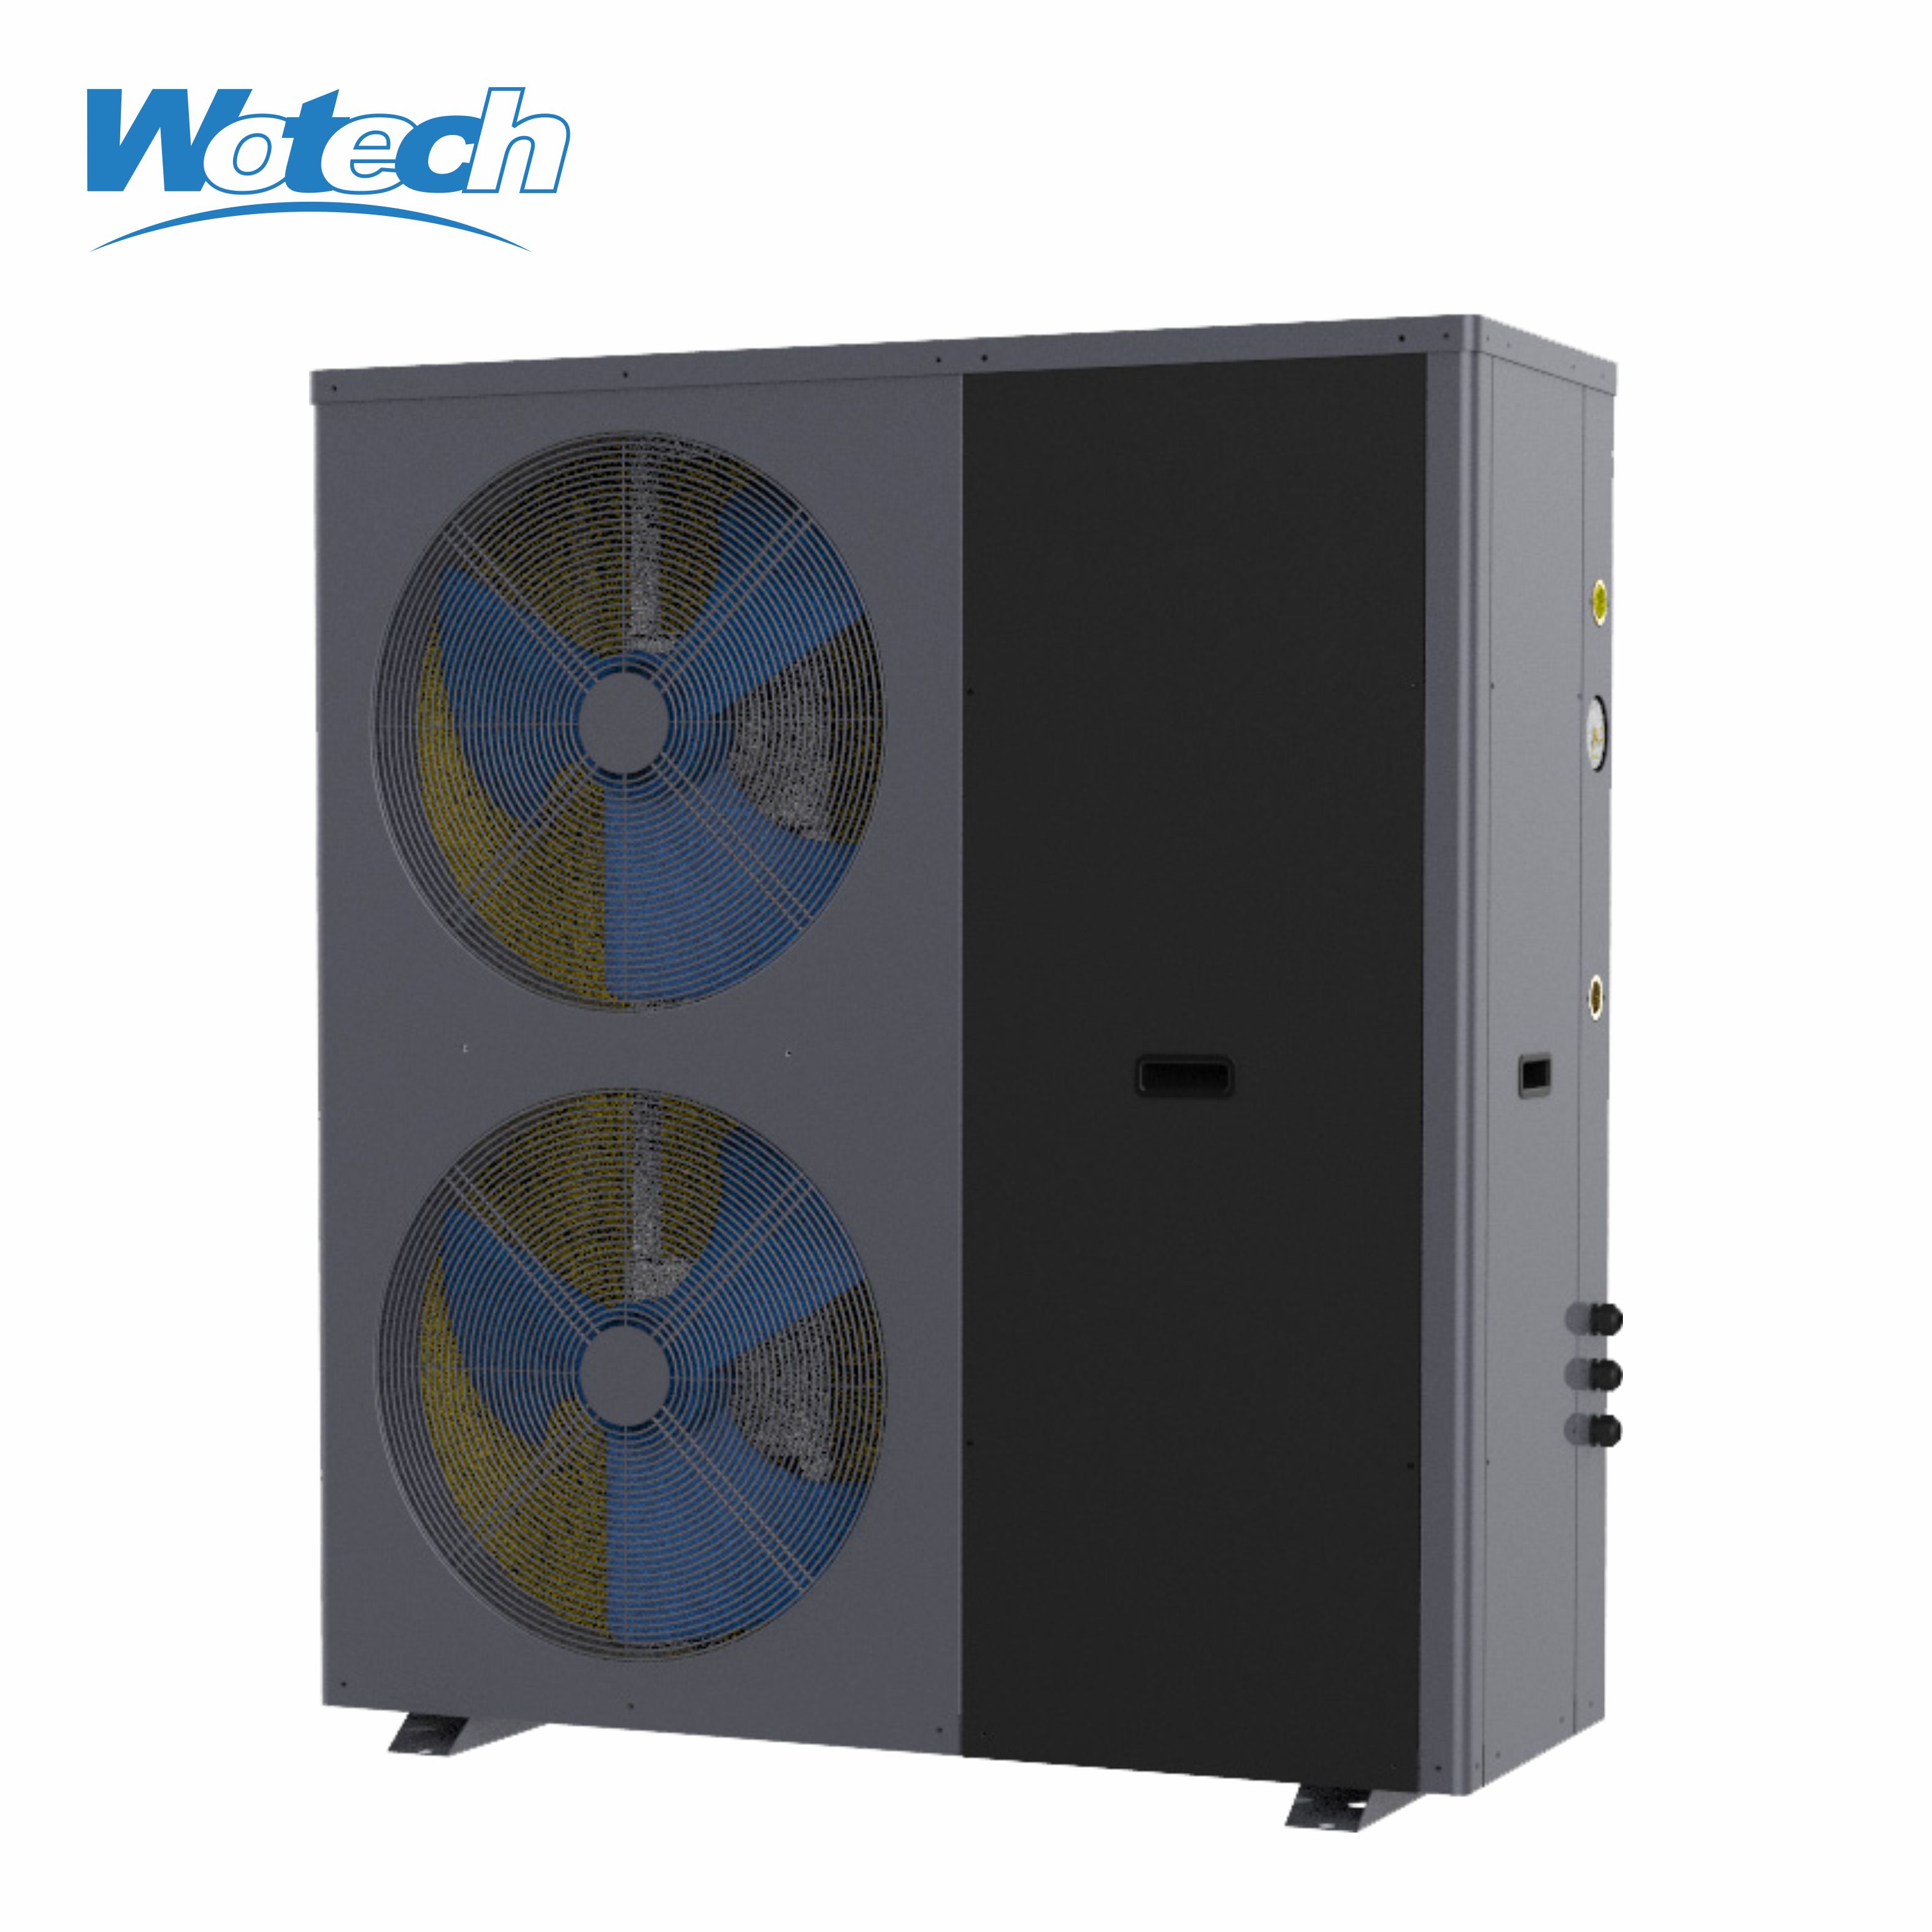 R32 Home Heating/cooling Air Source Heat Pump for High Efficiency